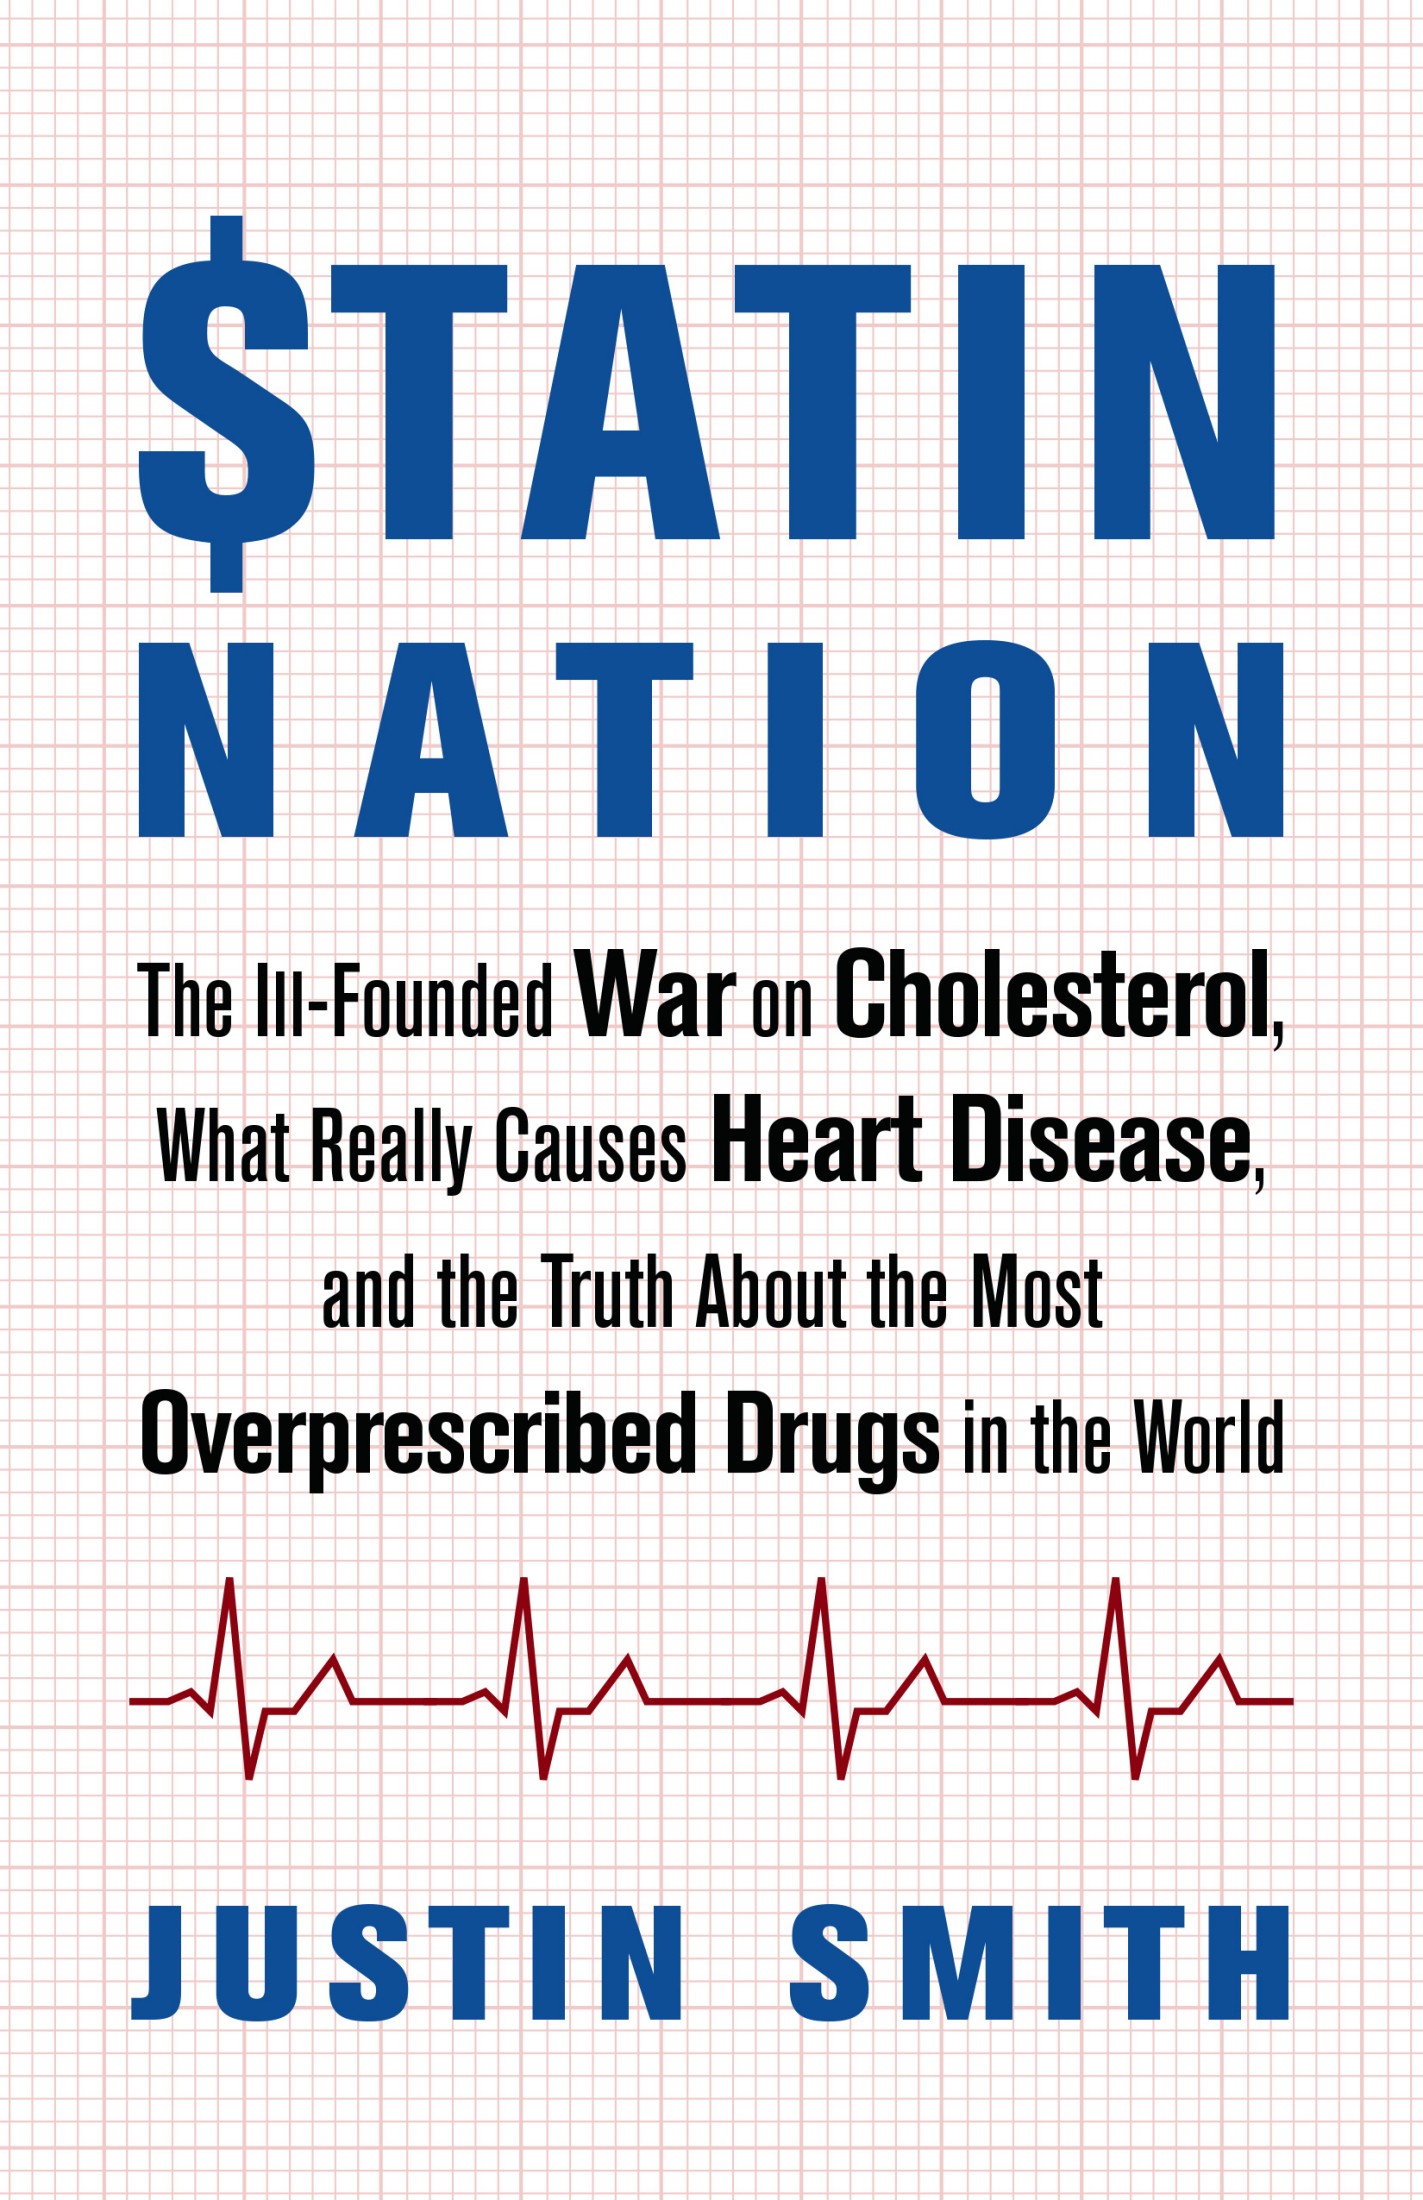 Statin Nation: The Ill-Founded War on Cholesterol, What Really Causes Heart Disease, and the Truth About the Most Overprescribed Drugs in the World